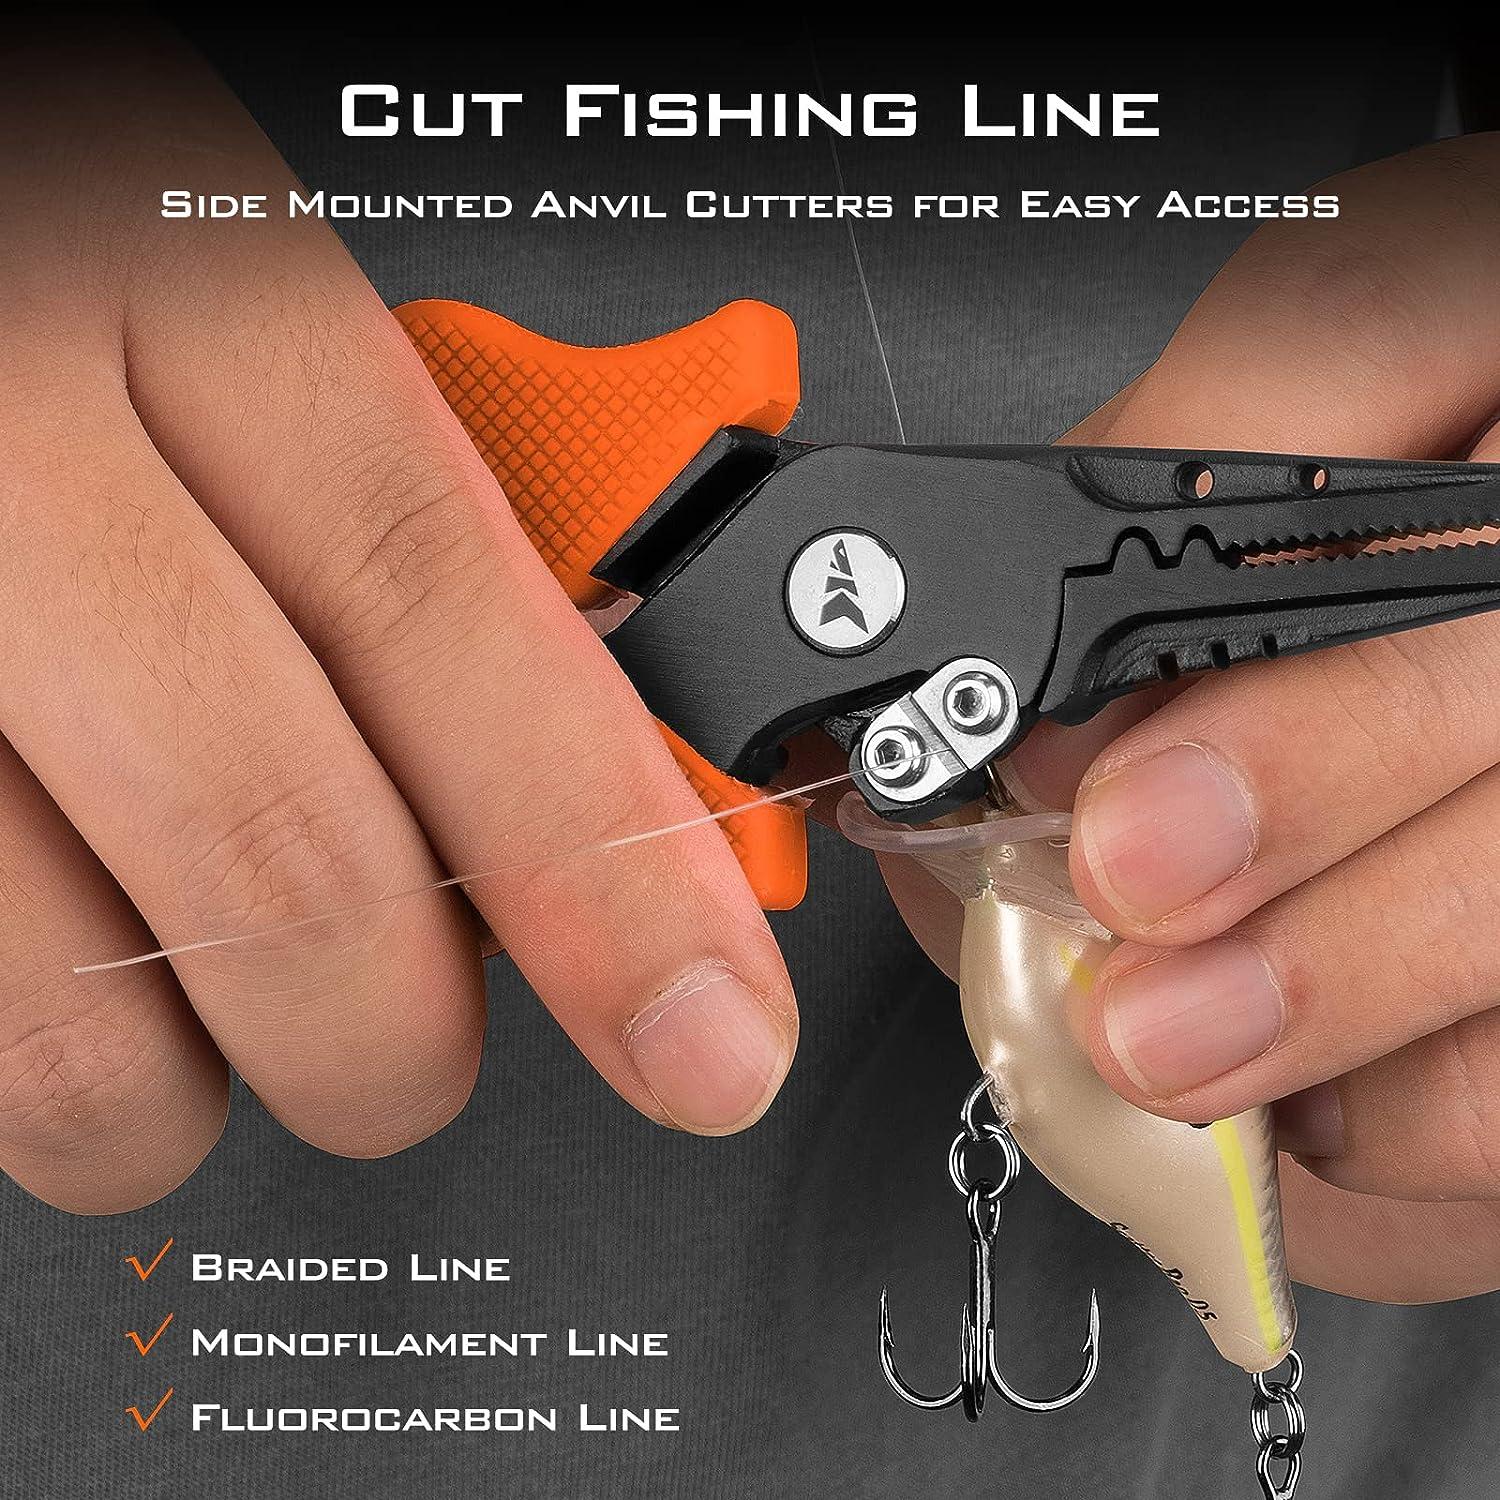 KastKing Cutthroat 7.5- inch Fishing Pliers and 5-inch Braid Scissors,  Saltwater Resistant Fishing Gear, Fishing Pliers Line Cutter, Hook Remover, Fishing  Tools Set, Fishing Gifts for Men B: Split Ring Plier and